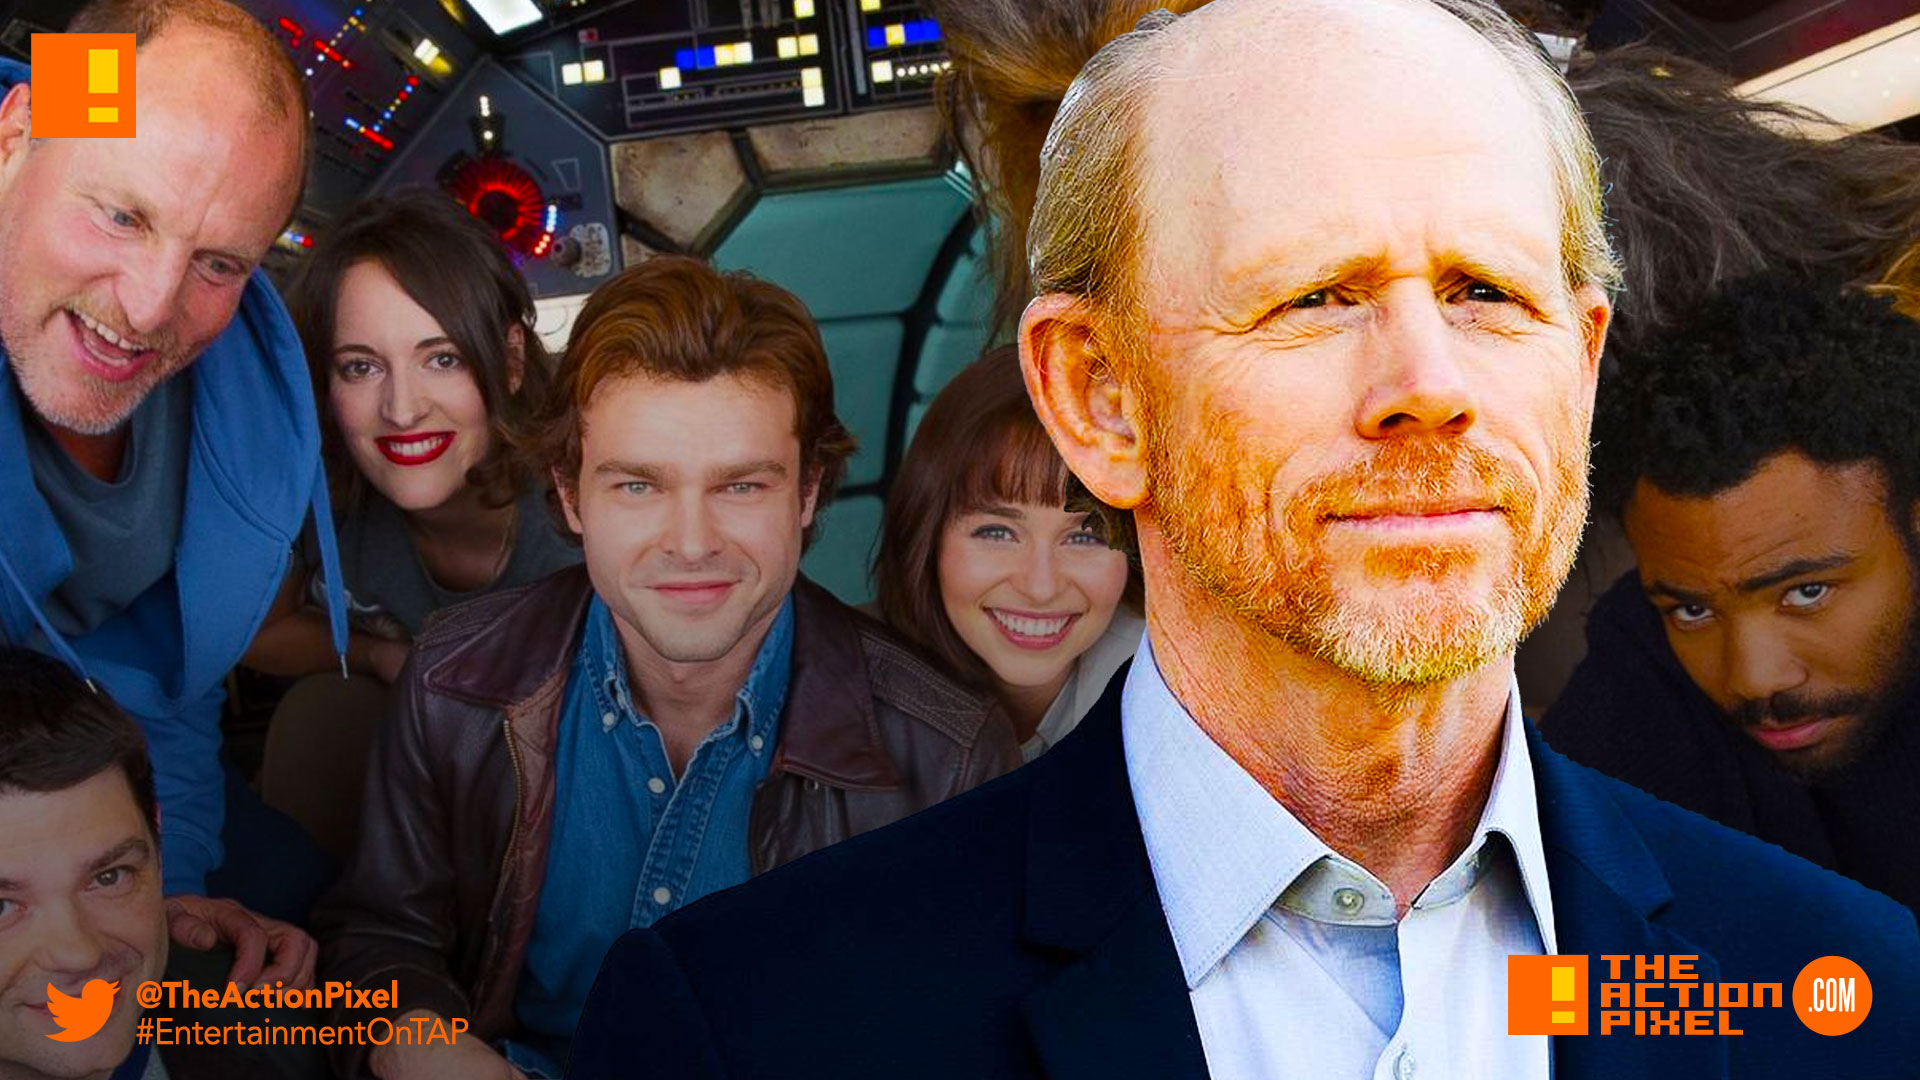 ron howard, han solo, a star wars story, alden ehrenreich, han solo, the action pixel, star wars, solo movie, han solo solo movie, a star wars story, entertainment on tap, donald glover,woody harrelson